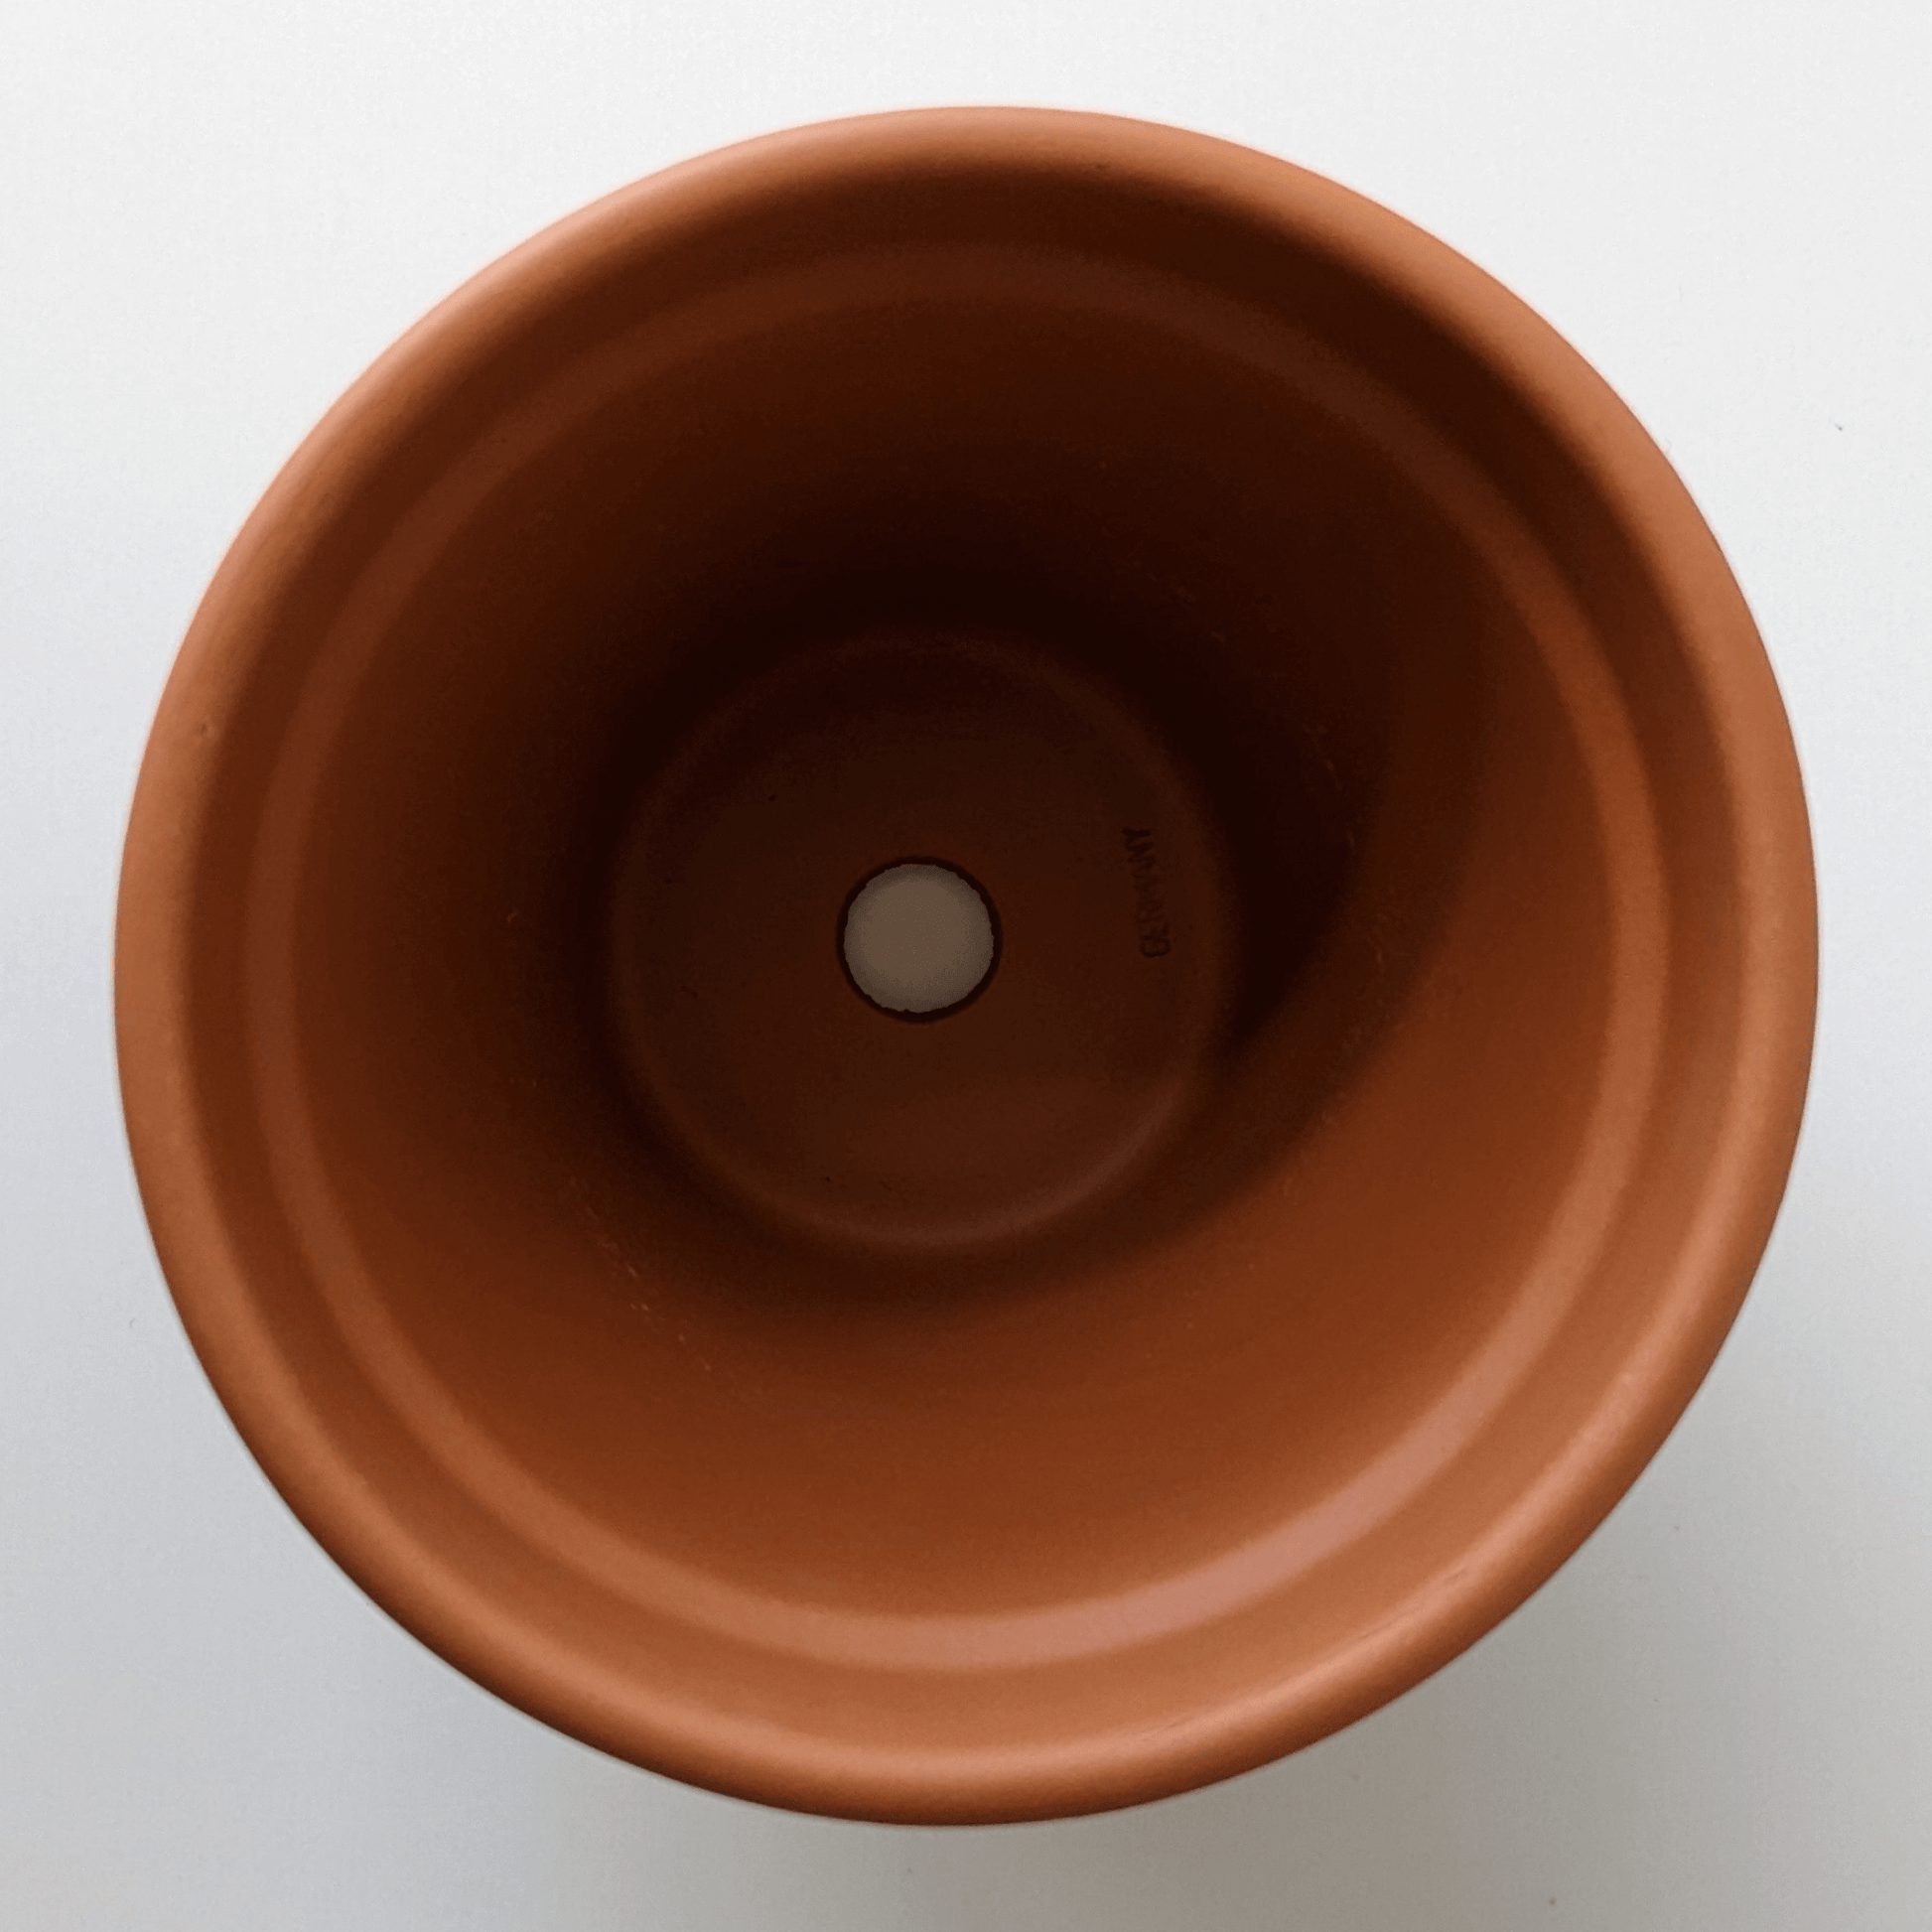 A clay pot viewed from the top.